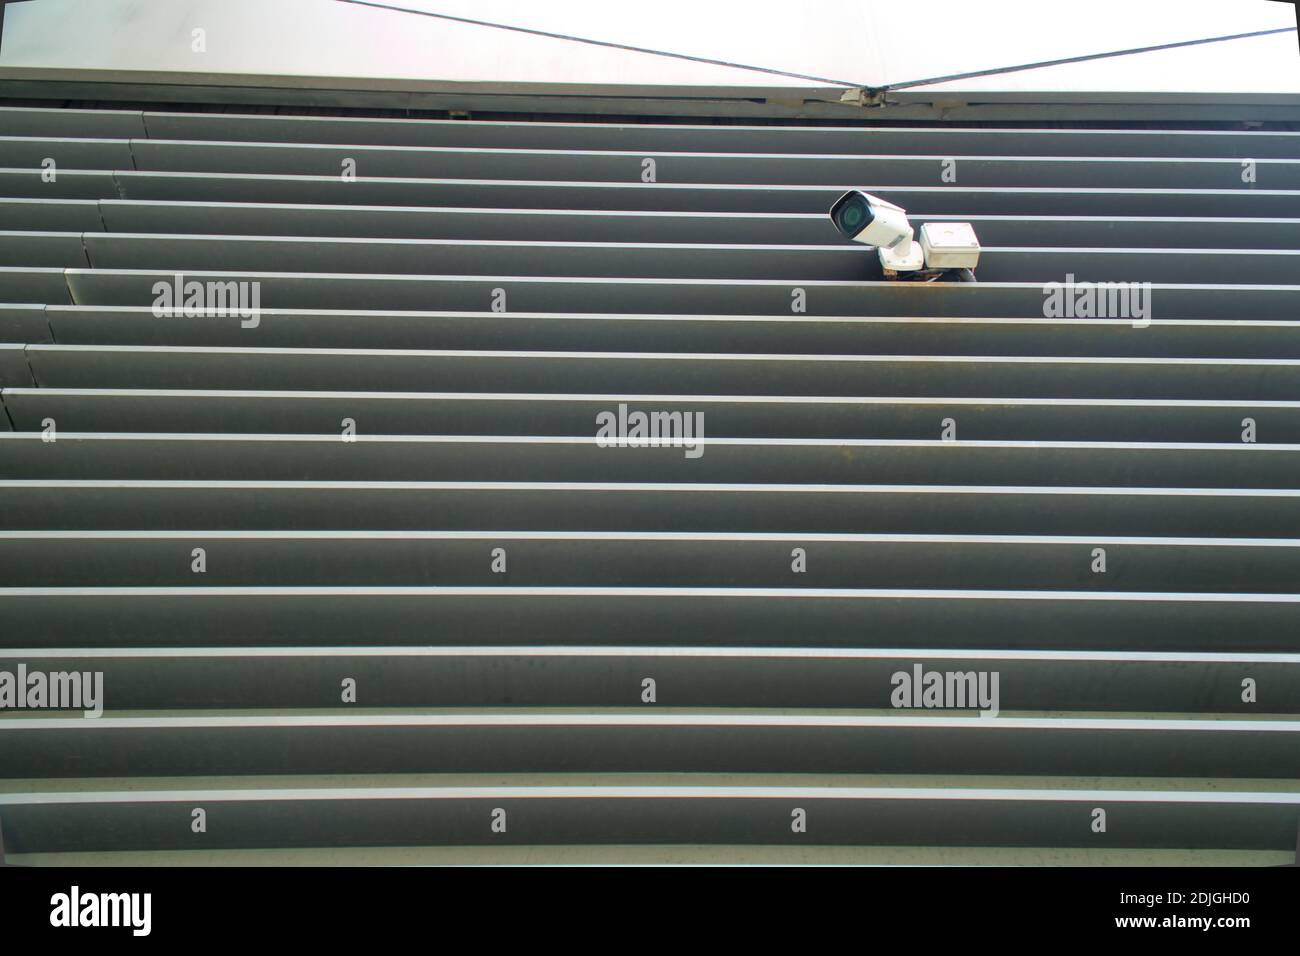 Low Angle View Of Cctv On Wall Stock Photo